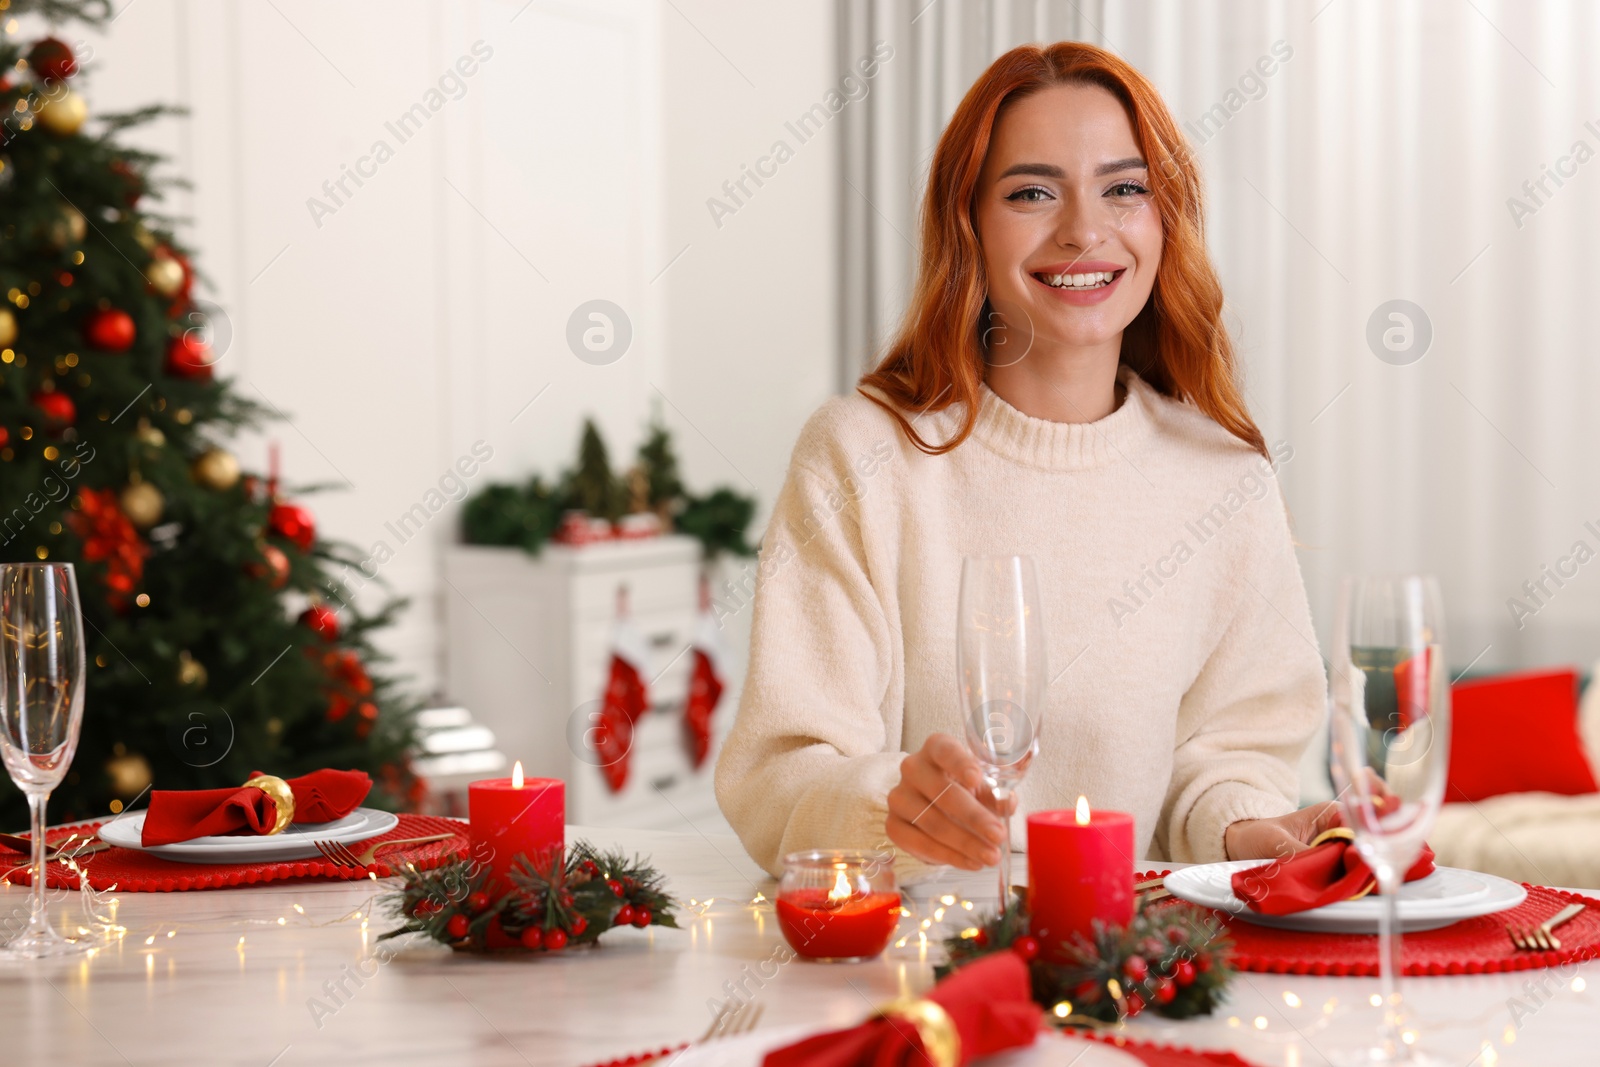 Photo of Beautiful young woman setting table in room decorated for Christmas